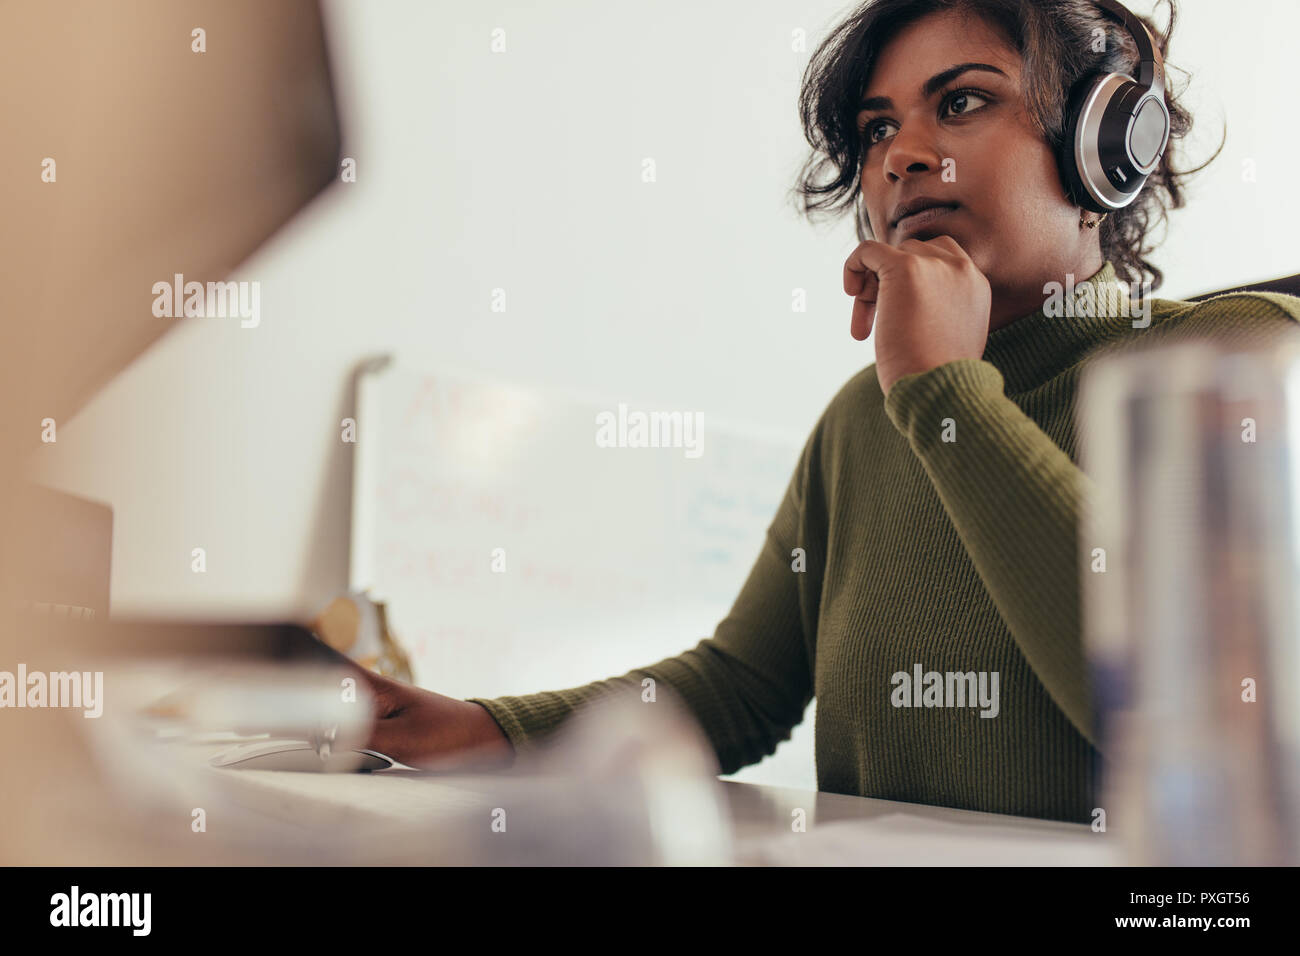 Portrait of woman wearing headphones looking at computer monitor. Female computer programmer working at her office desk. Stock Photo